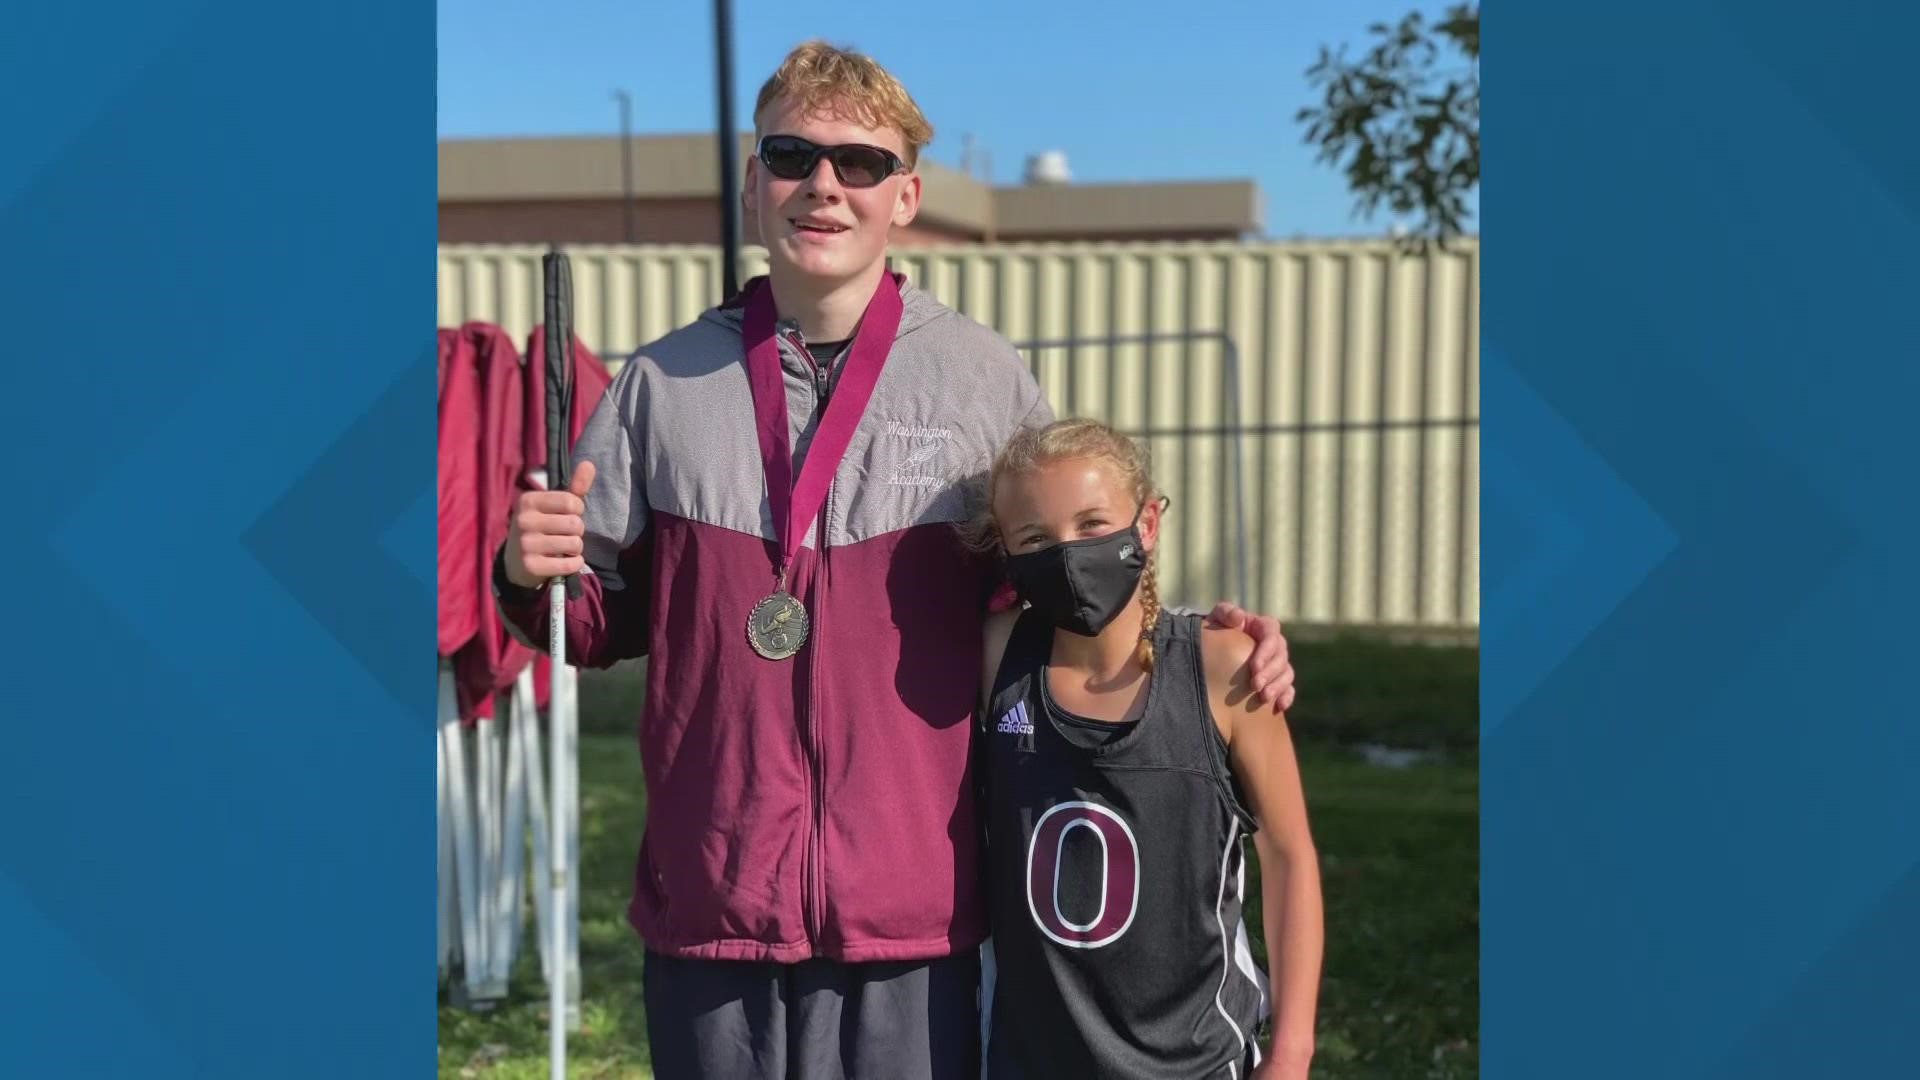 Orono High School cross country runner Ruth White gave her winning medal to Noah Carver, who runs for Washington Academy, in the viral photos.